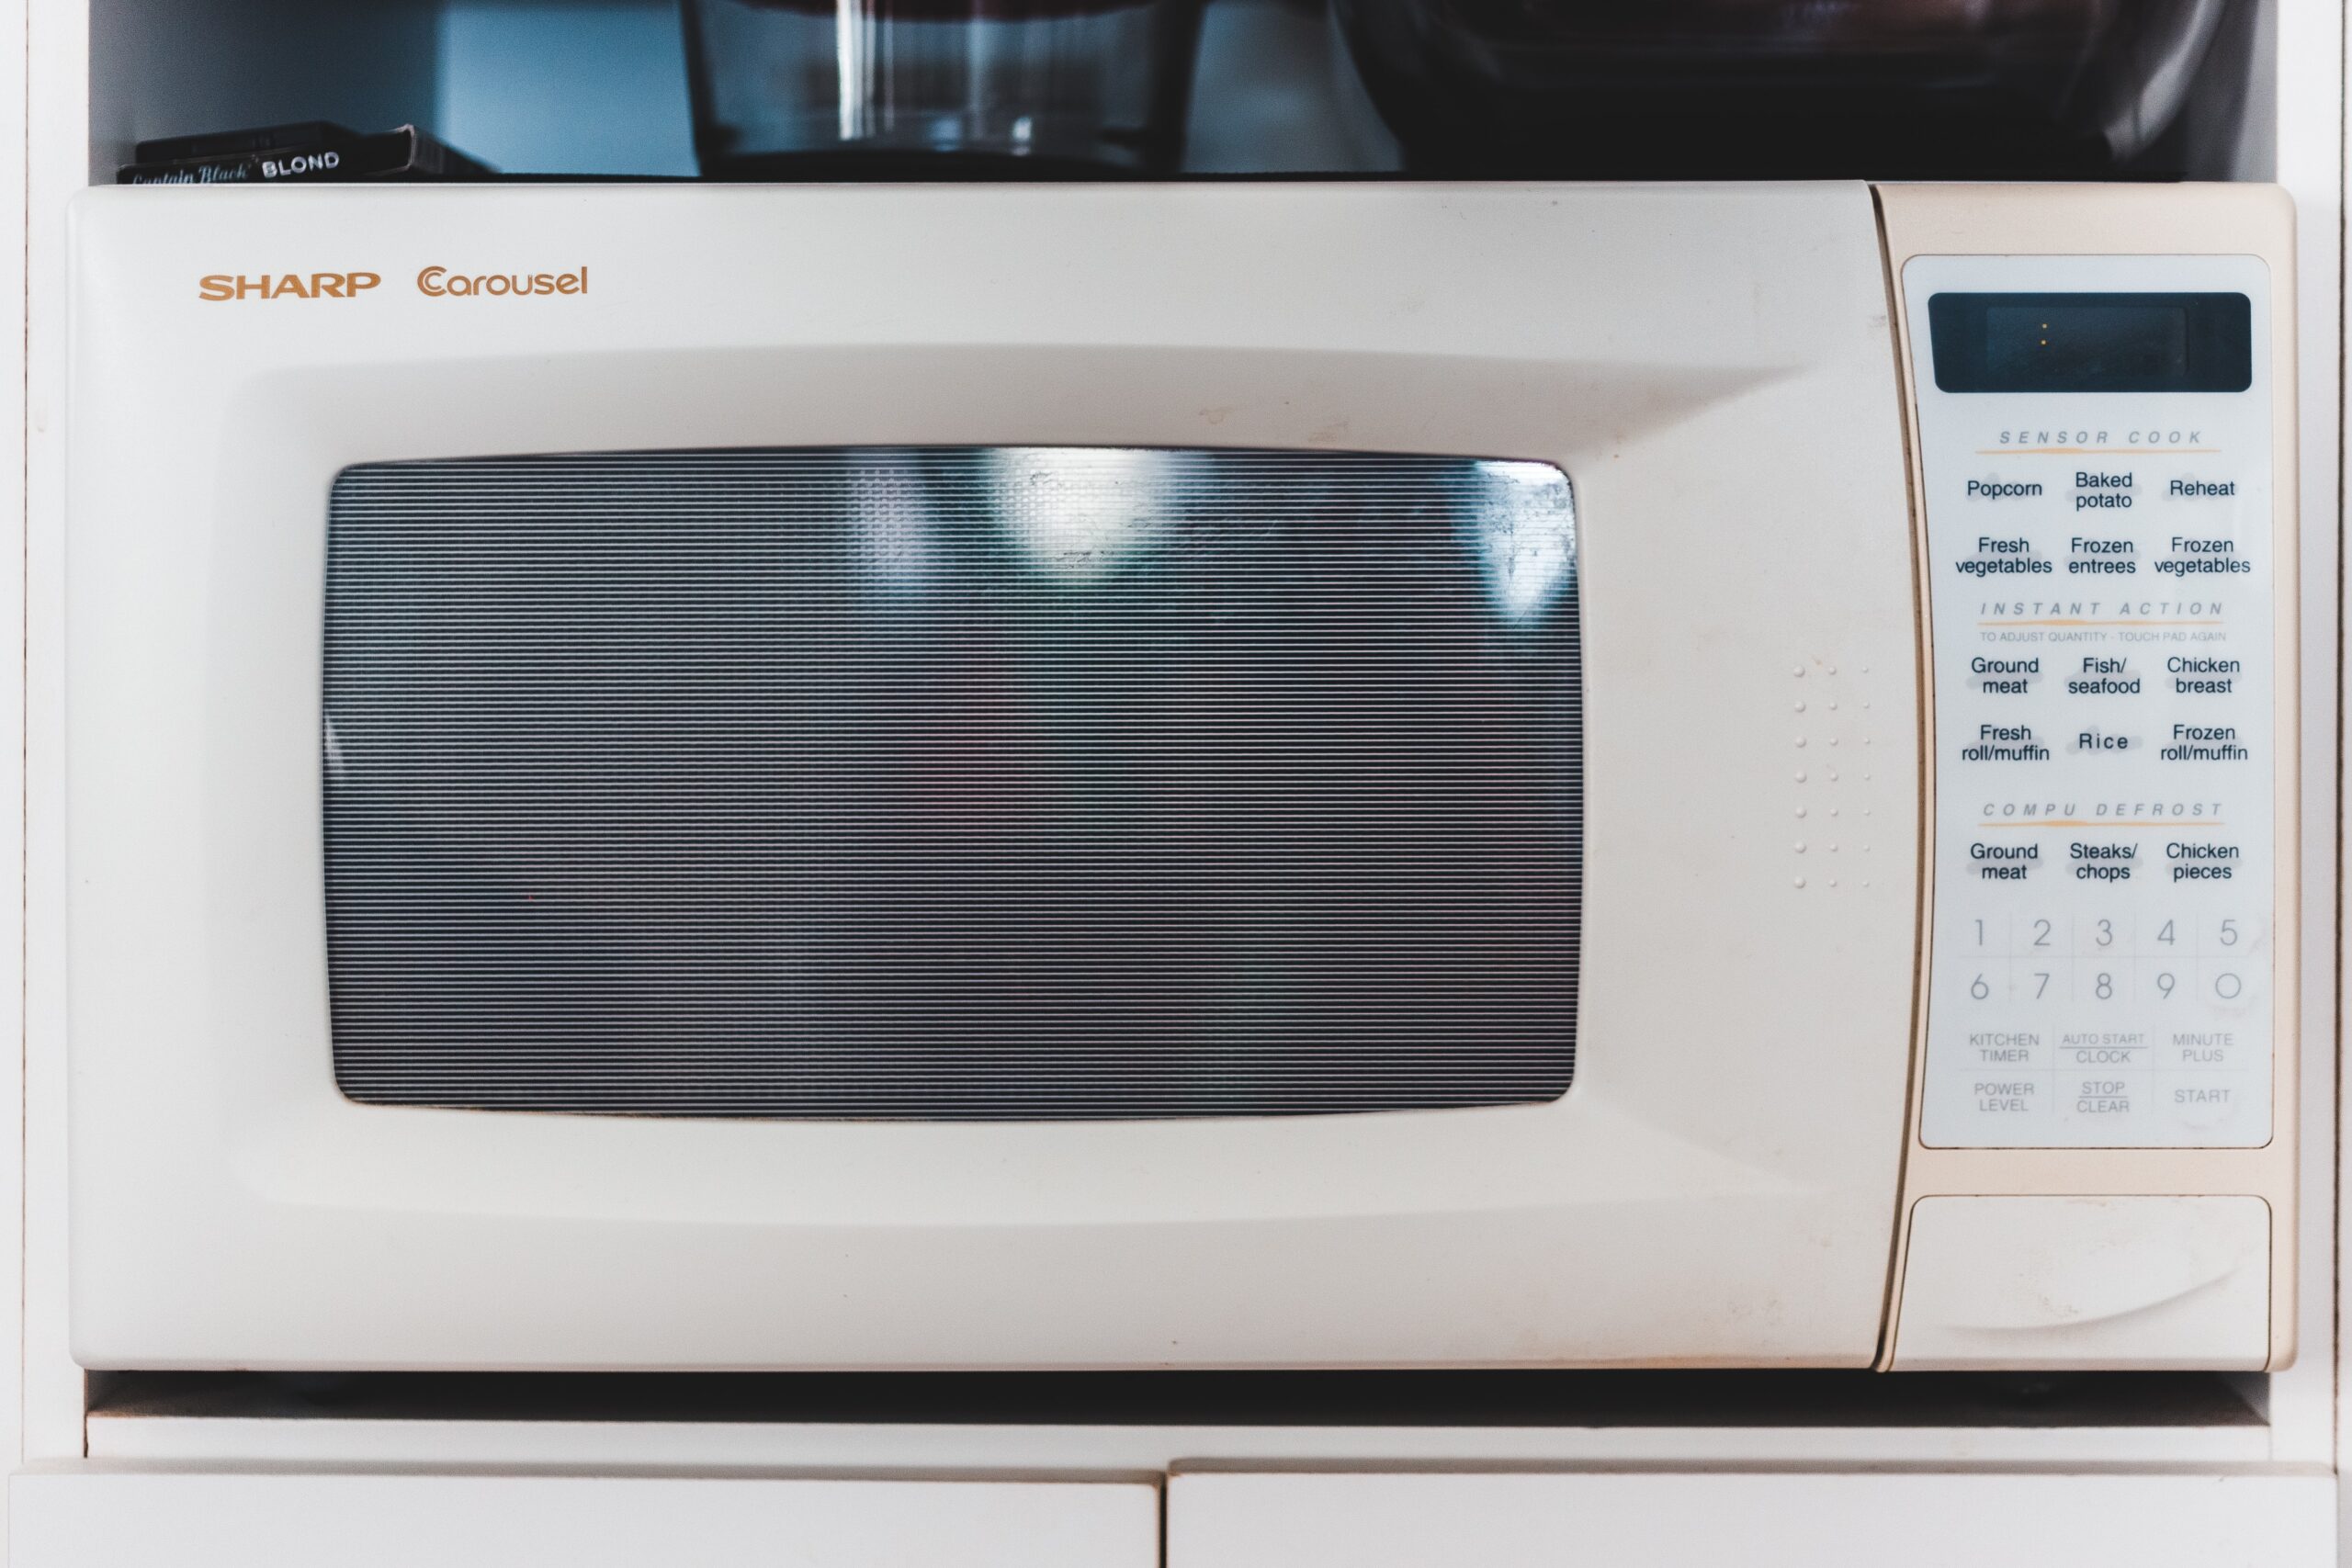 Image Of A White Microwave